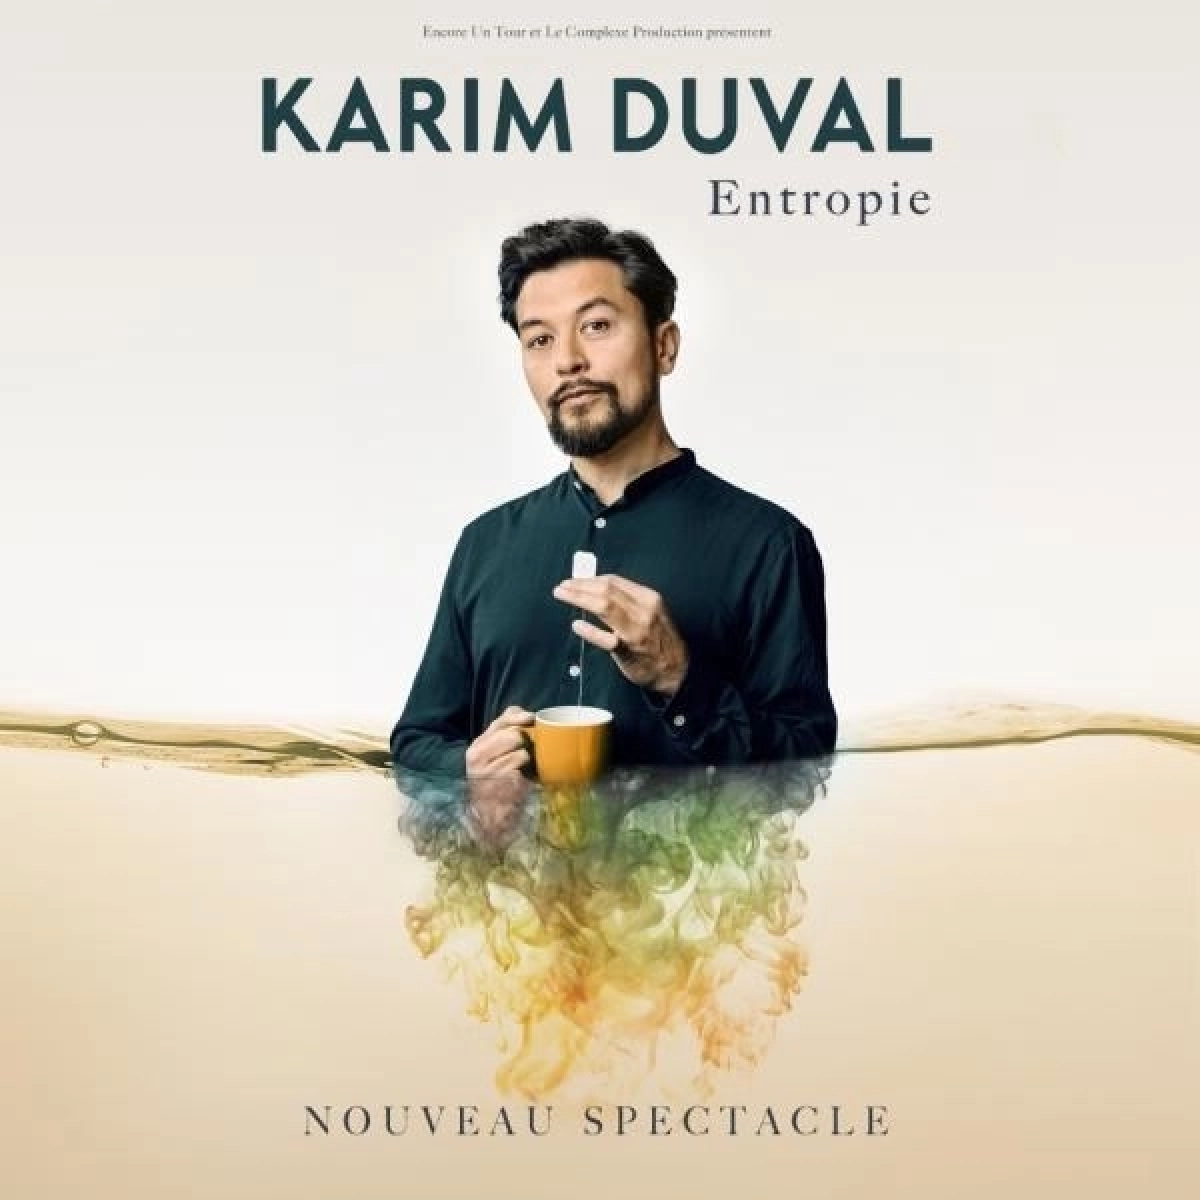 Karim Duval - Entropie at Casino Barriere Toulouse Tickets